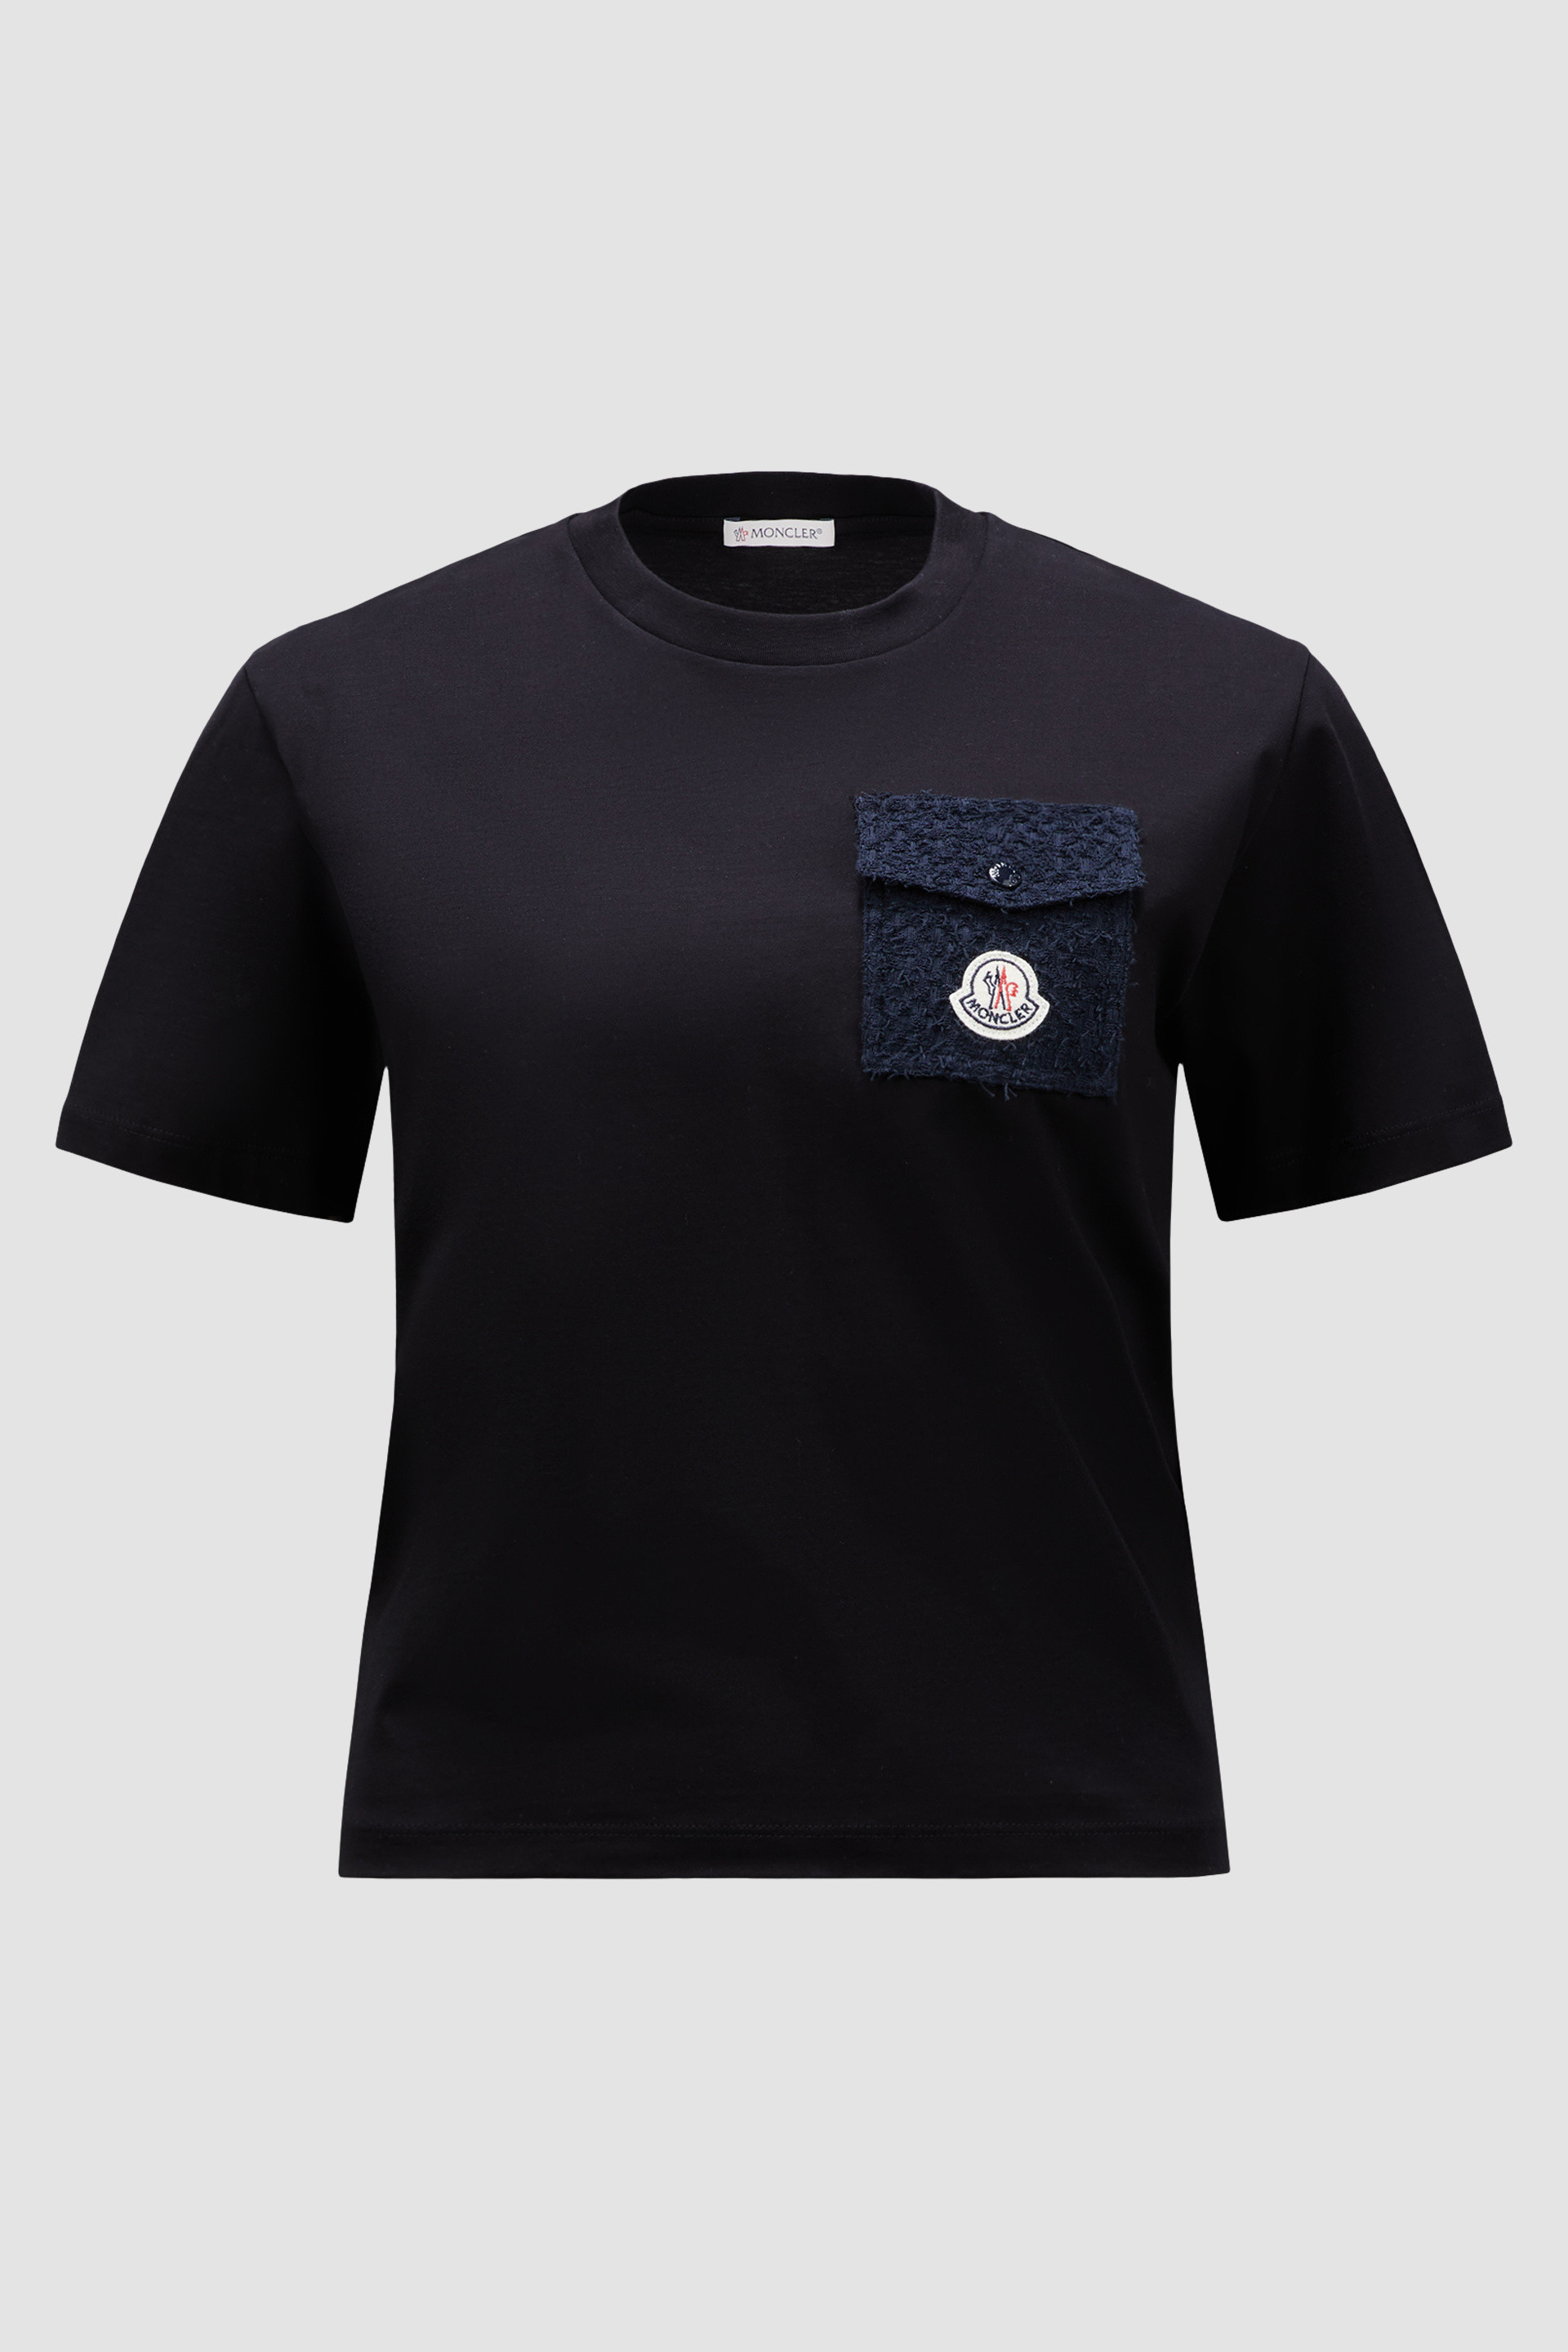 T-Shirt With Pocket